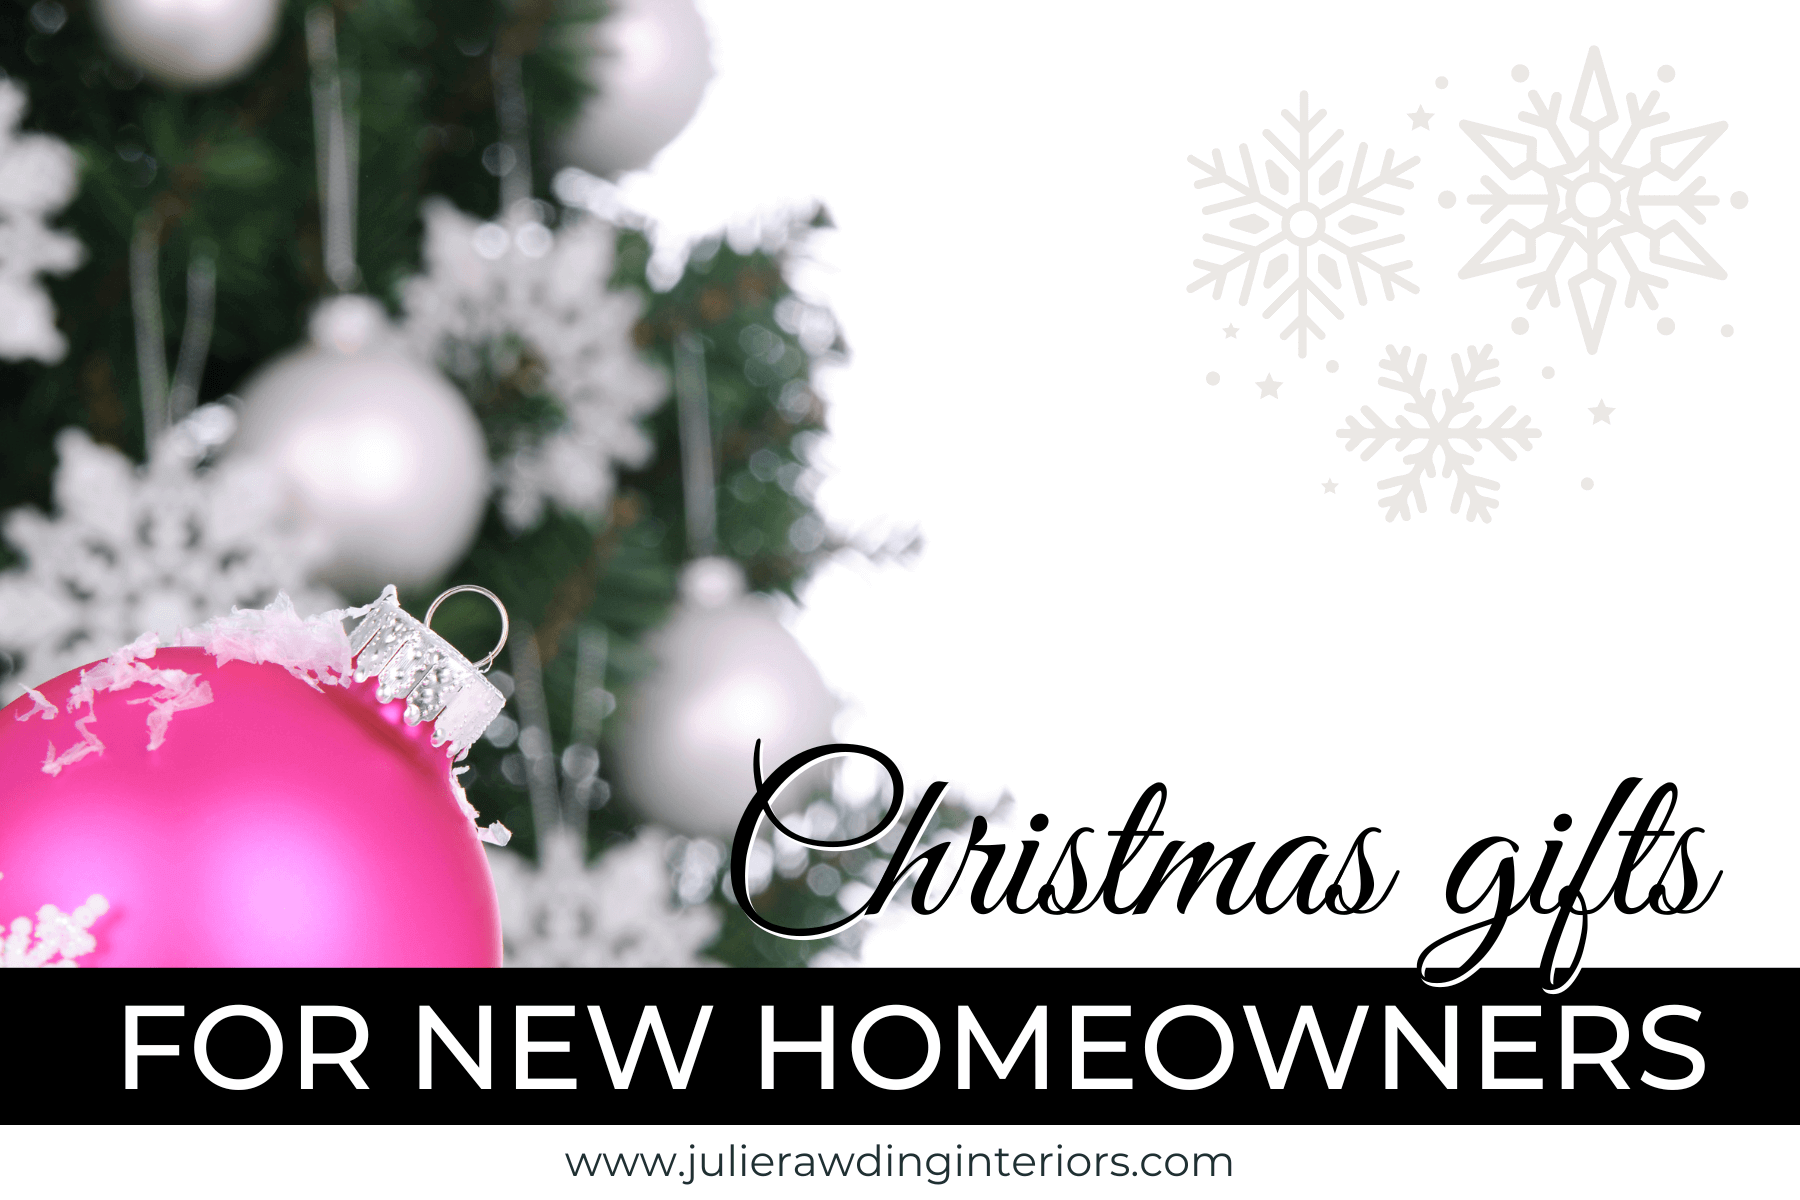 5 types of amazing Christmas gifts for new homeowners